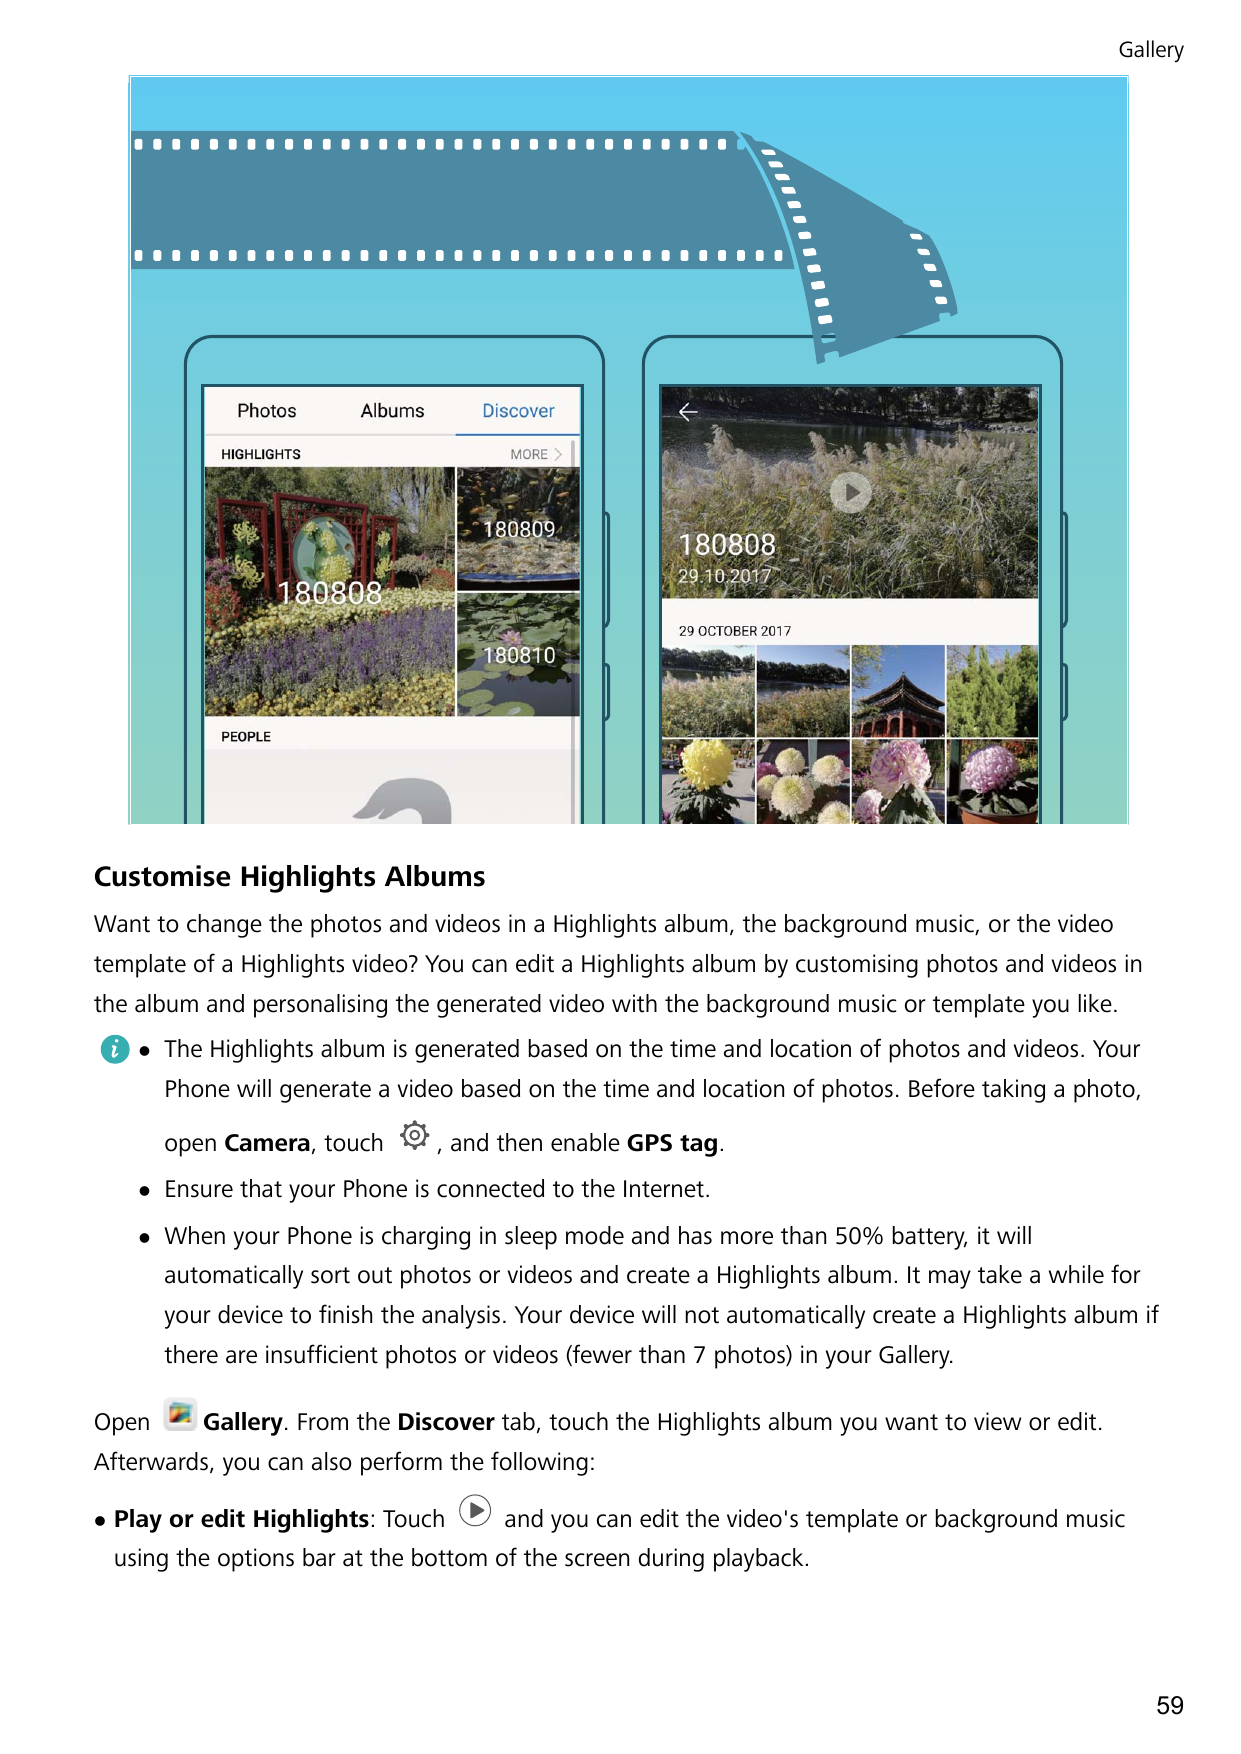 GalleryCustomise Highlights AlbumsWant to change the photos and videos in a Highlights album, the background music, or the video